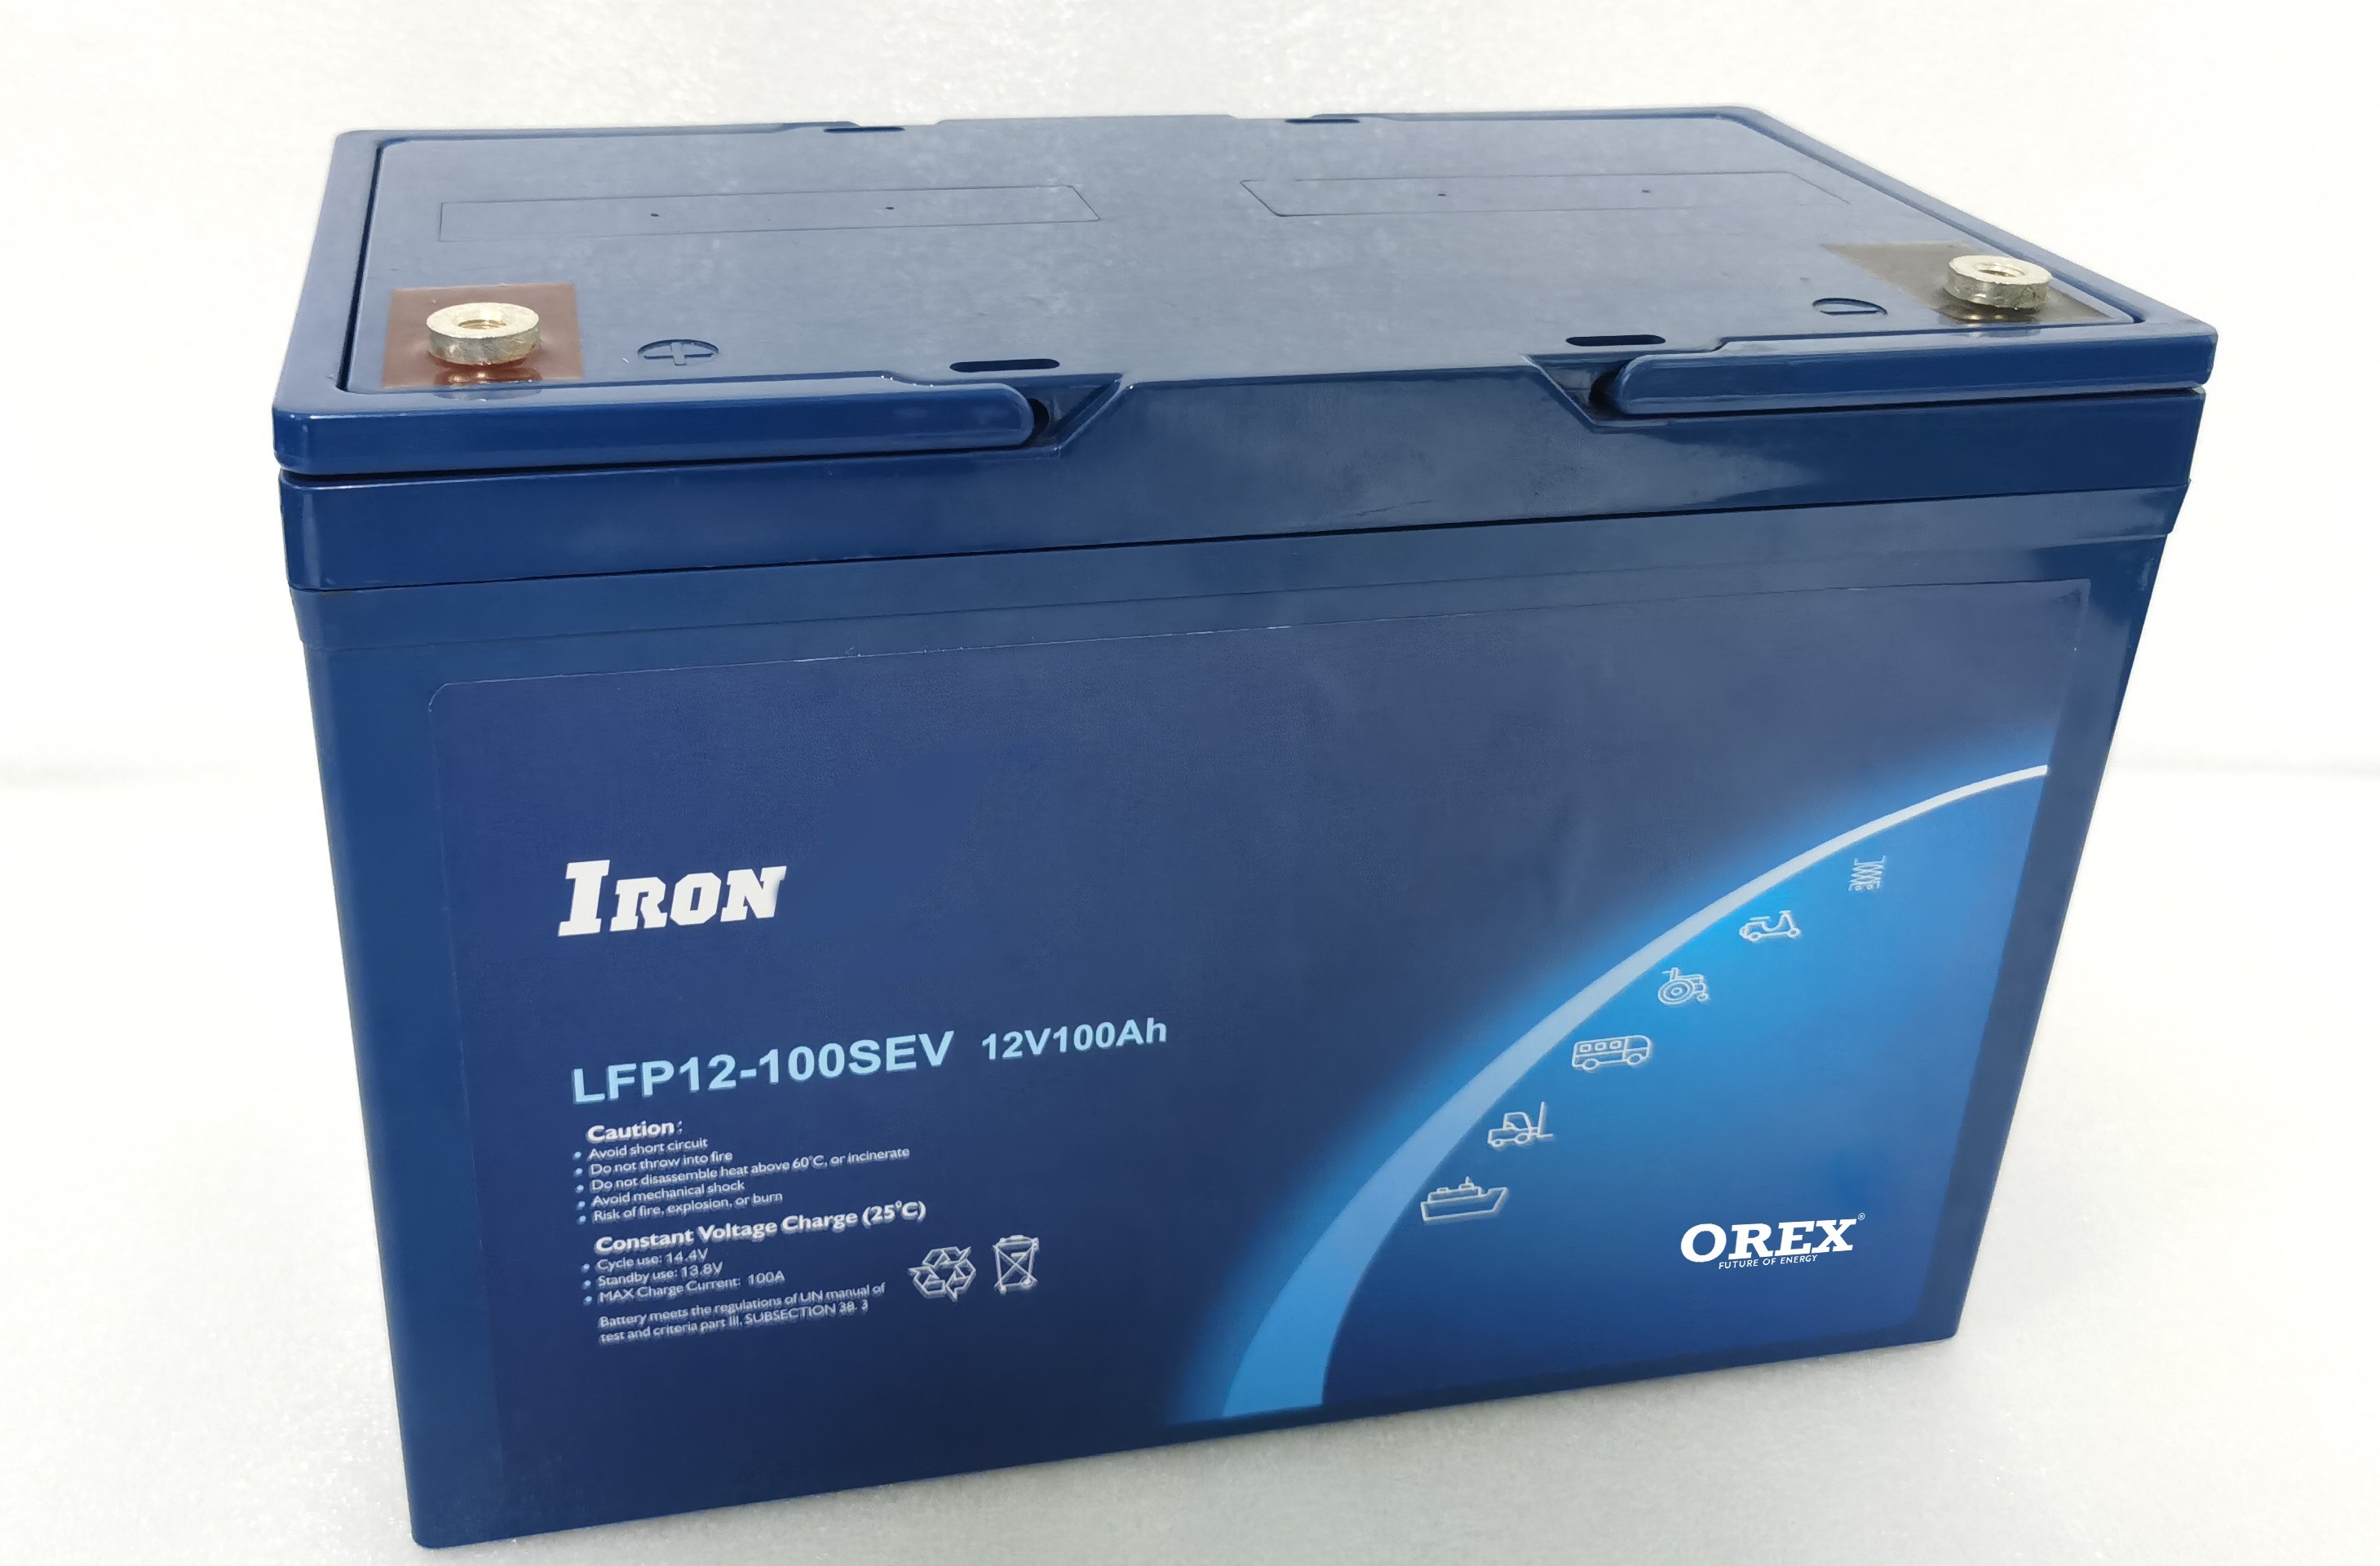 https://orexpower.com/storage/images/products/lithium_battery_12v_100ah14fd102c08b2a5ea4be63f3d452b8931f38be964.jpeg